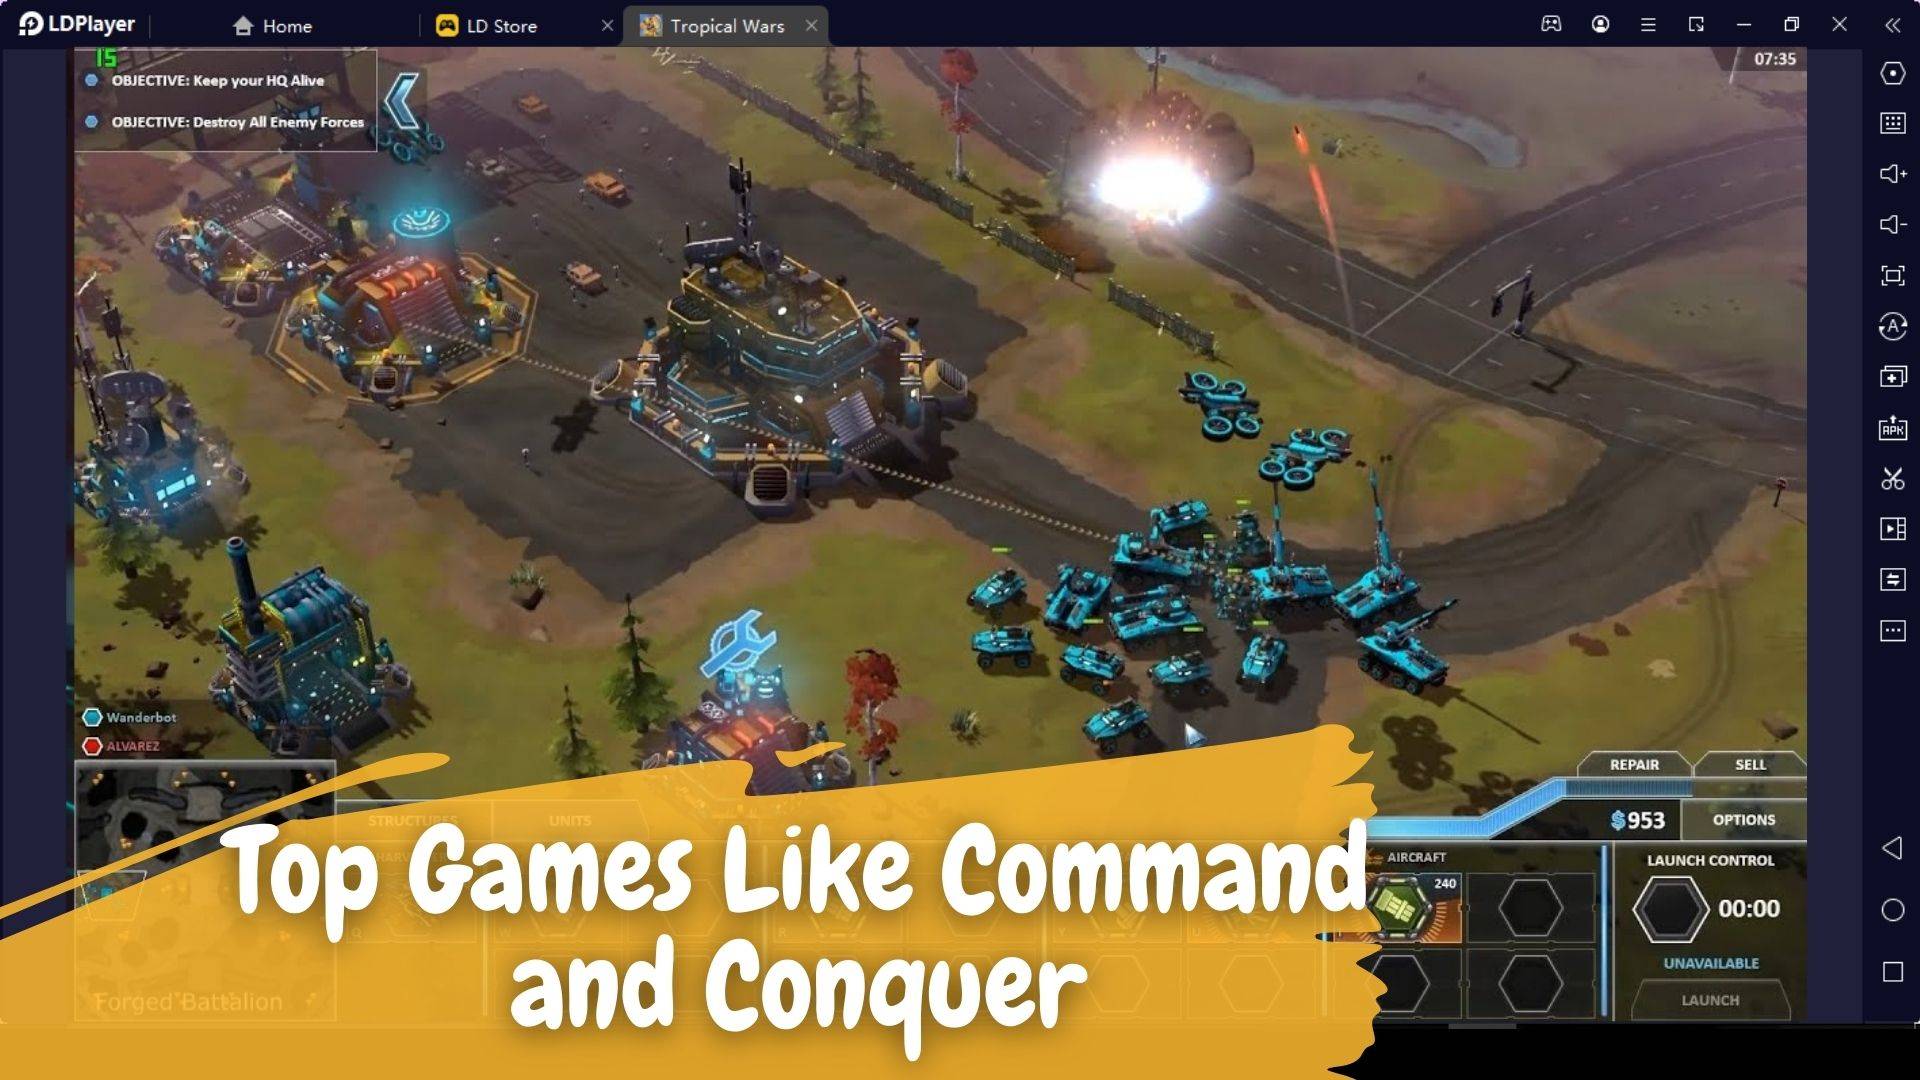 star wars game like command and conquer